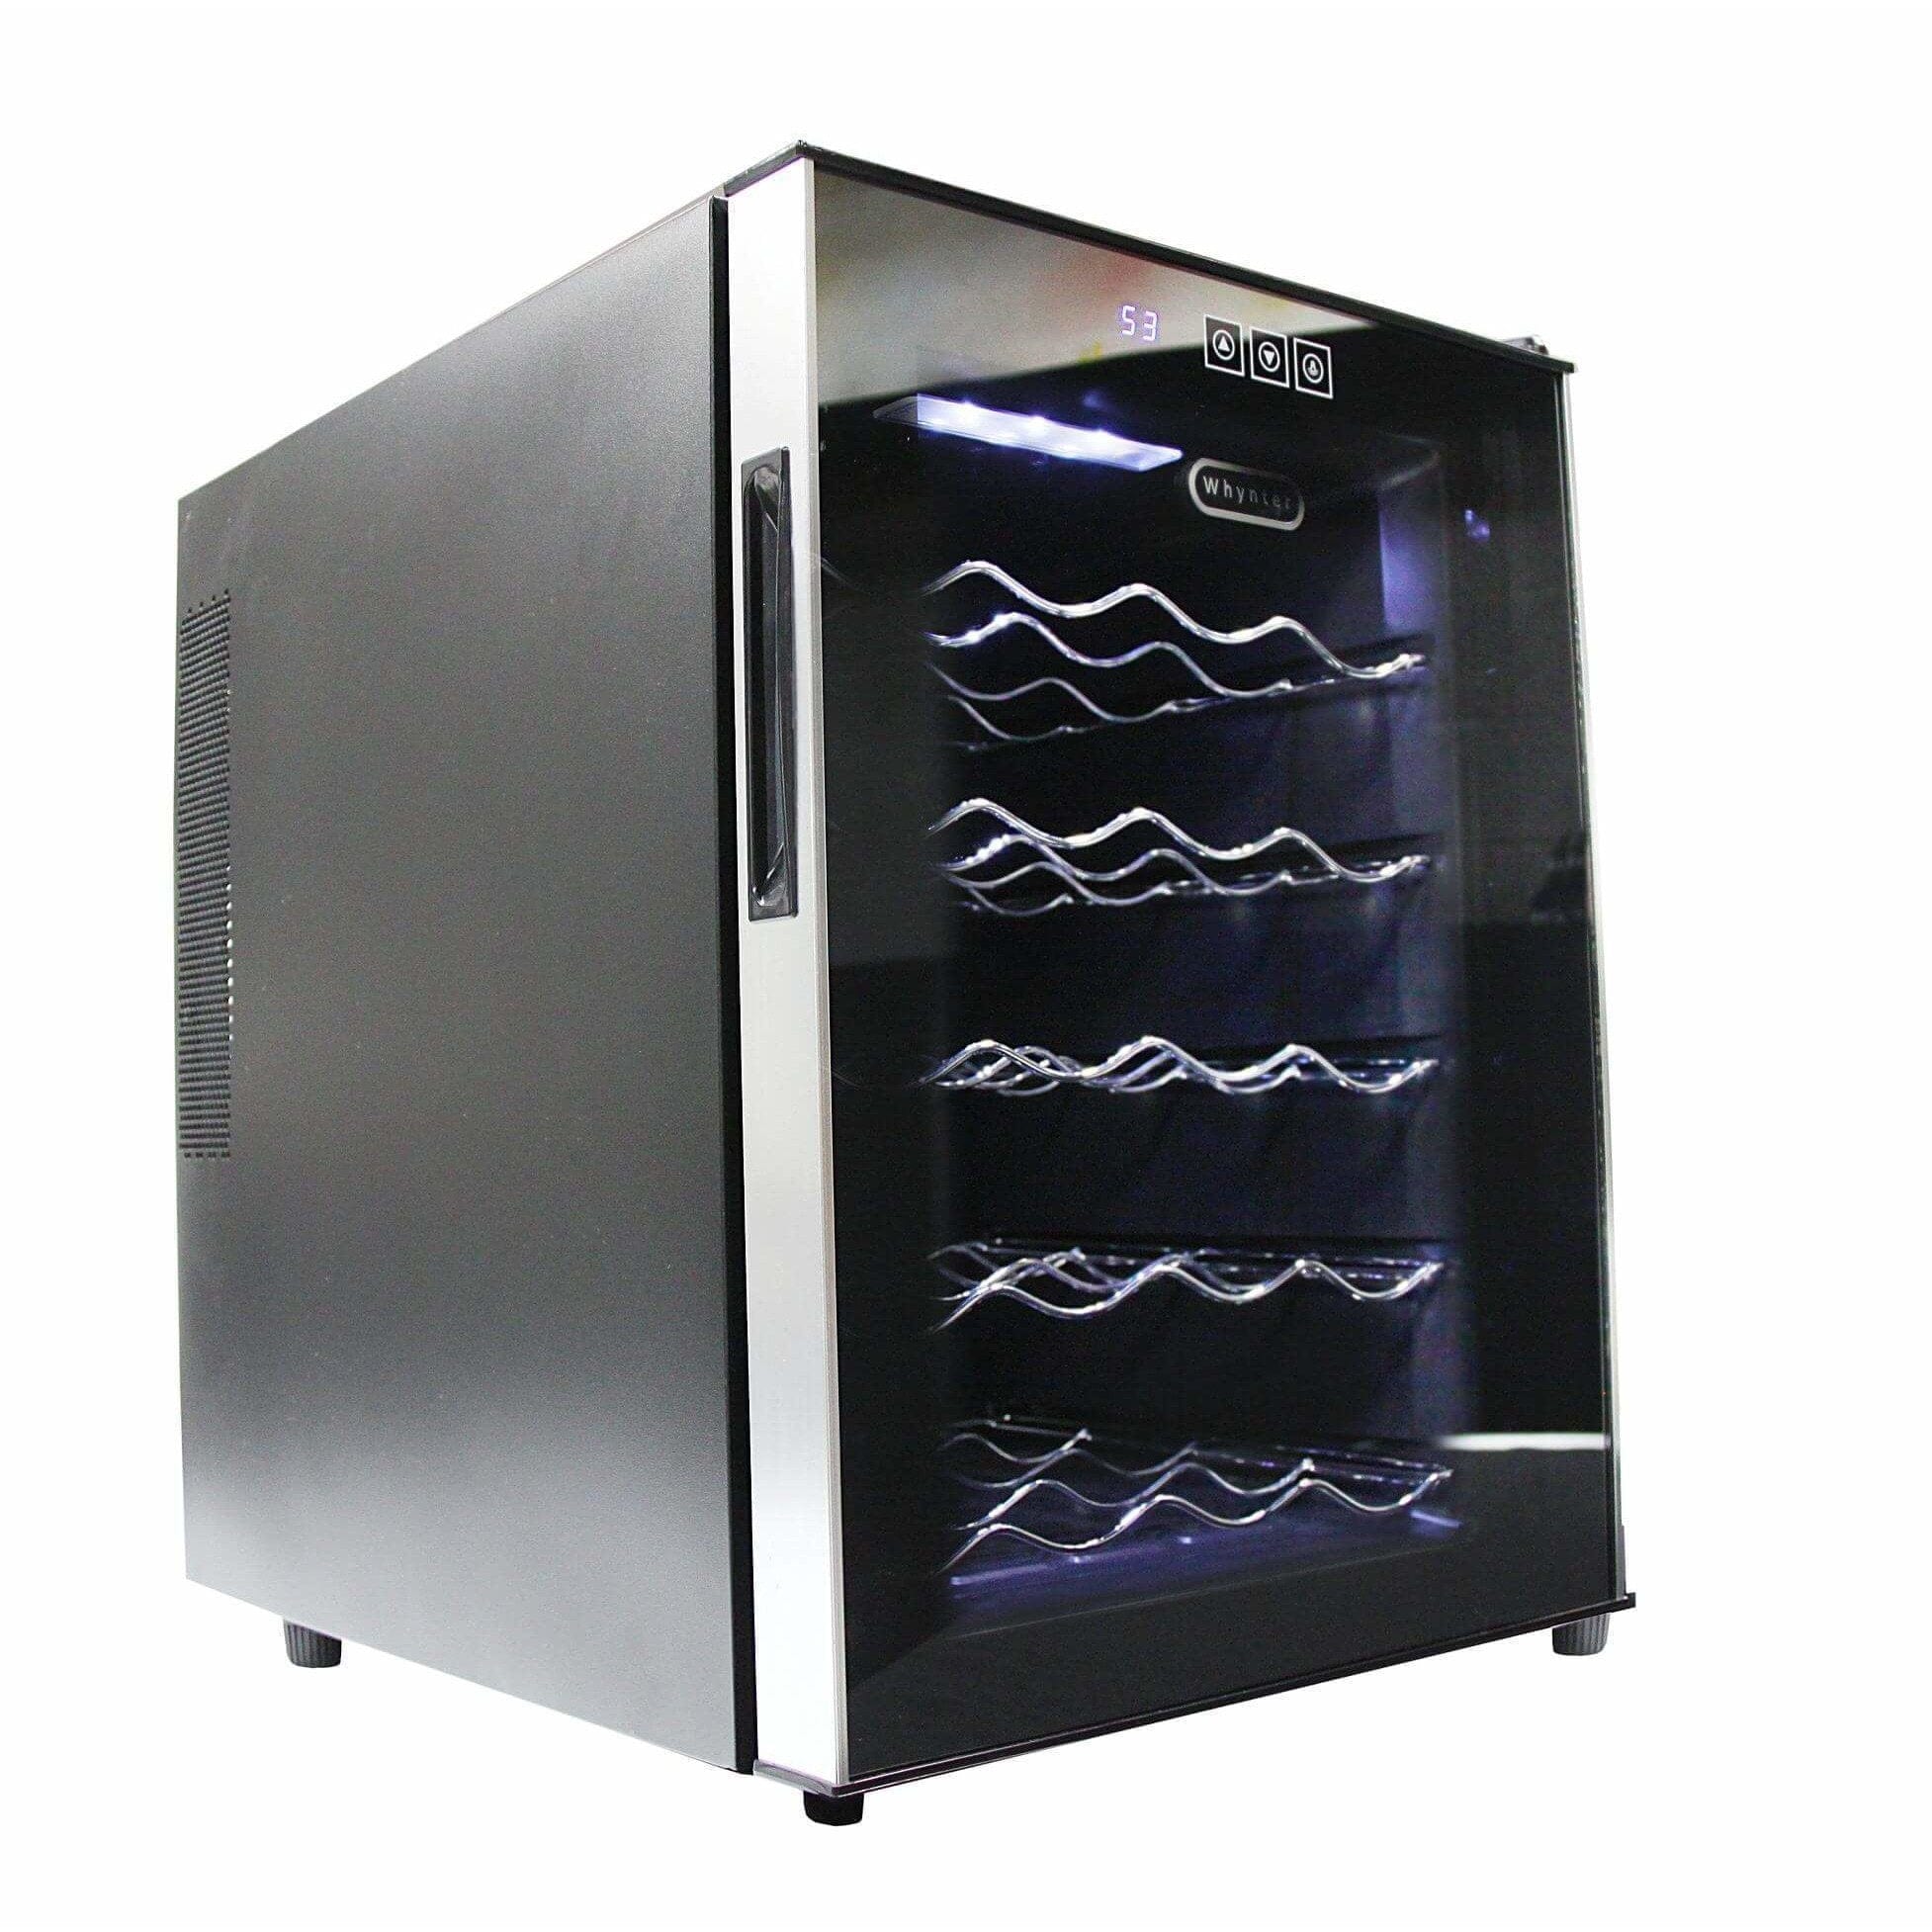 Whynter 20 Bottle Thermoelectric Wine Cooler WC-201TD Wine Coolers Empire